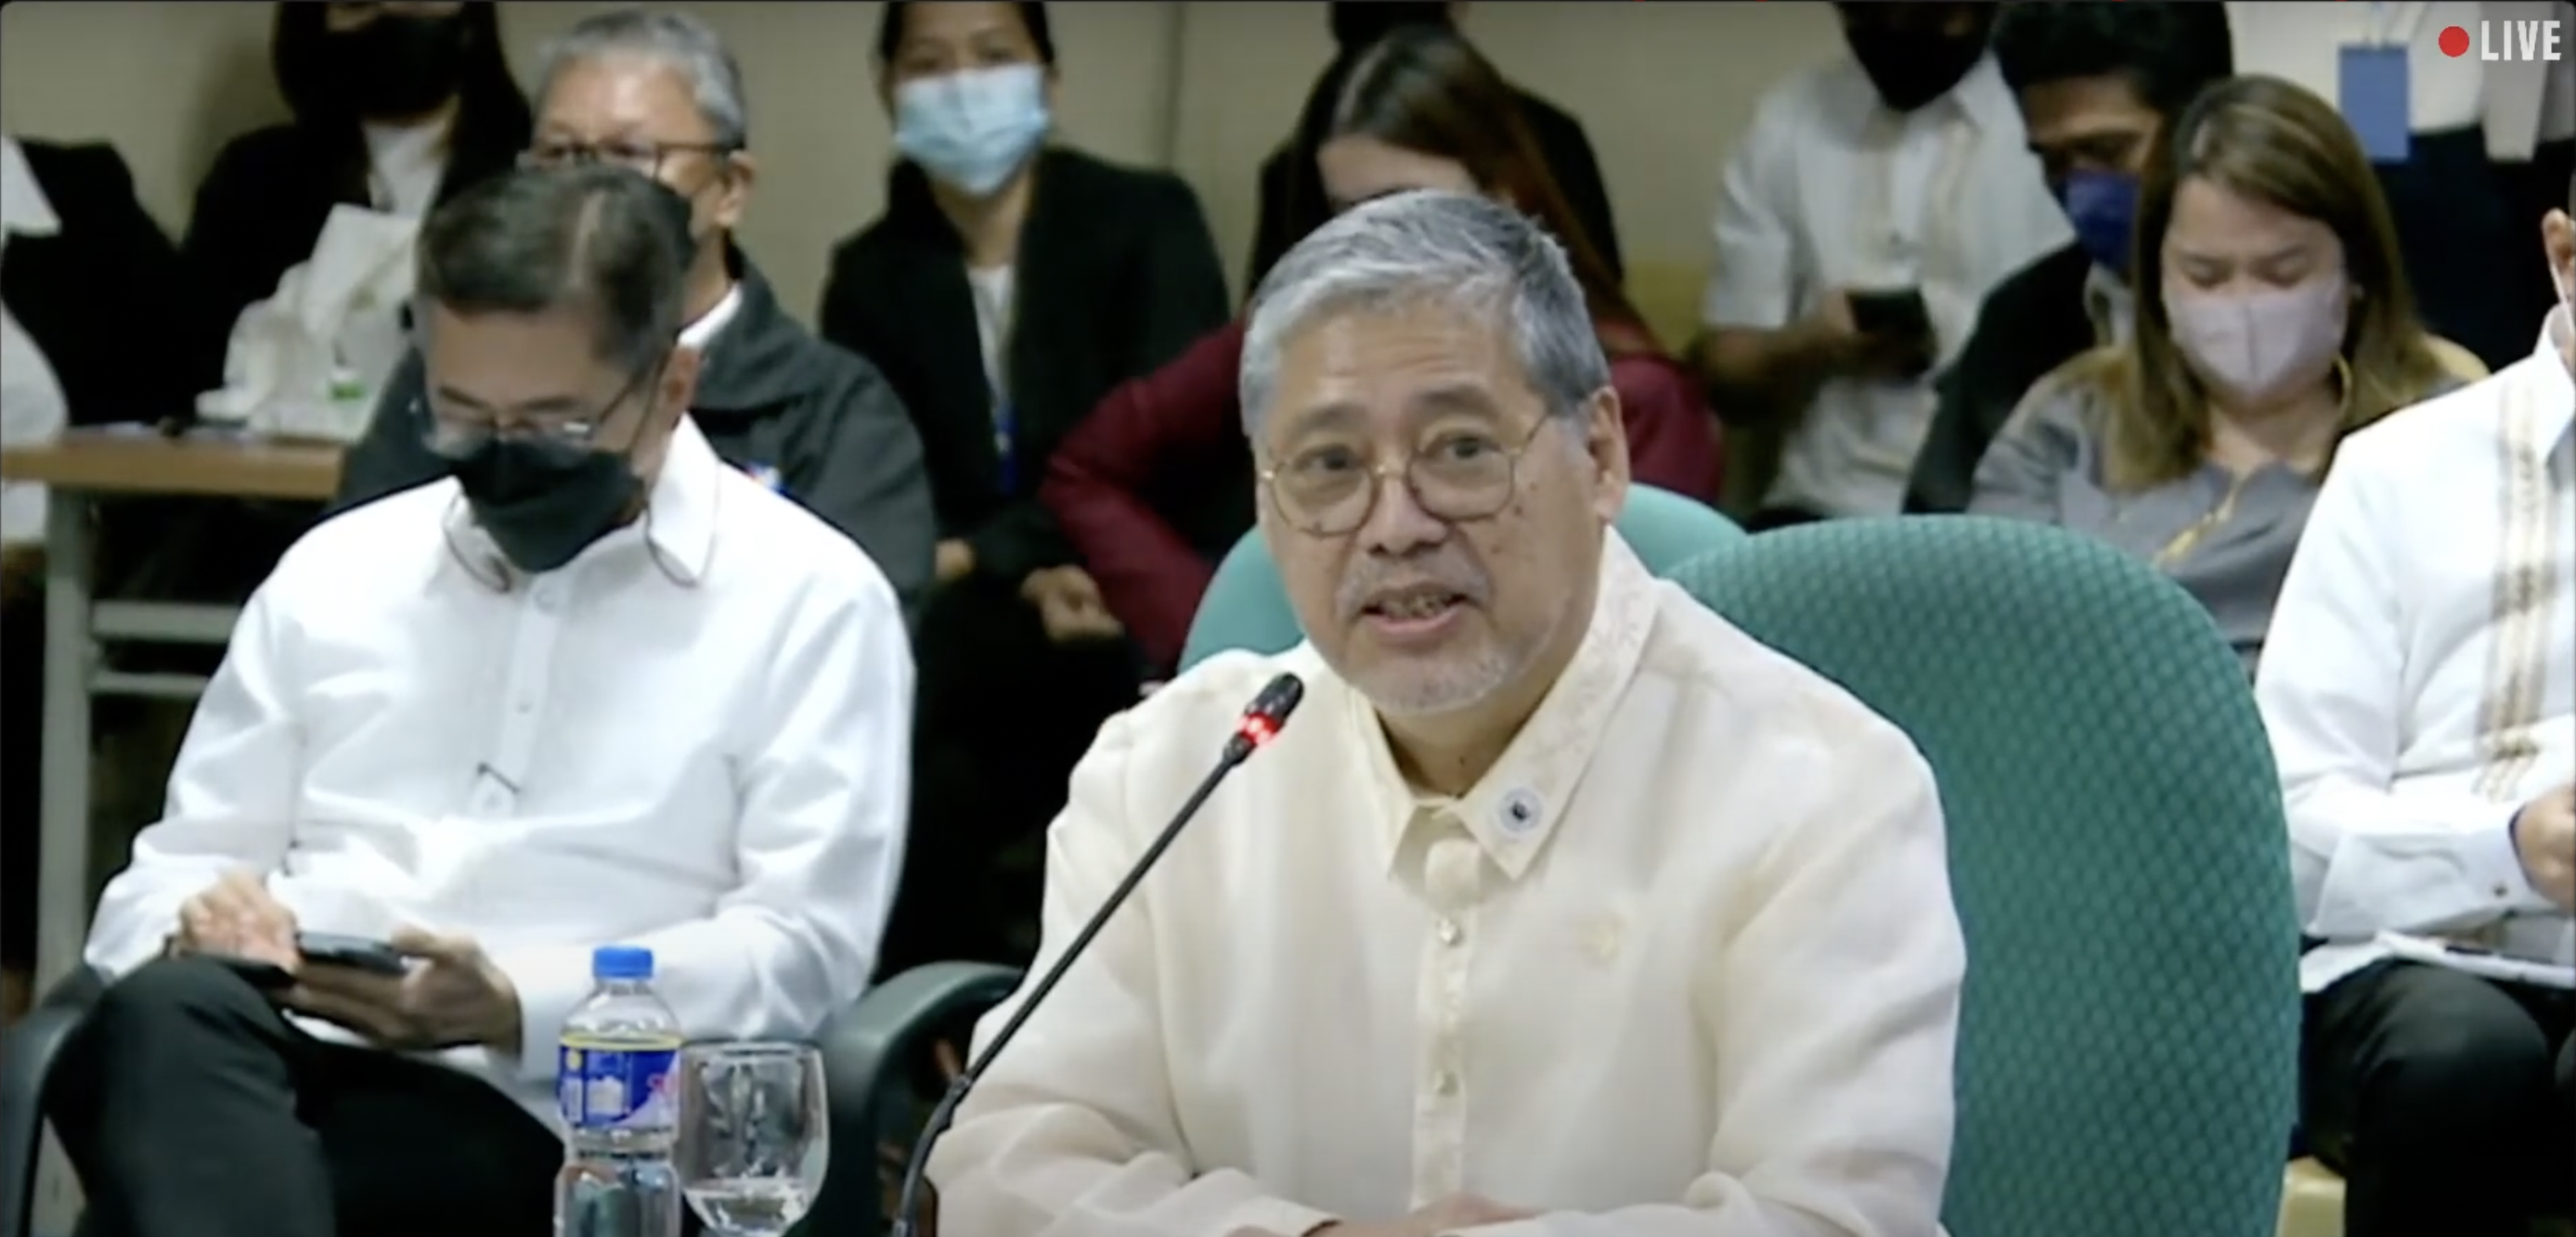 Foreign Affairs Secretary Enrique Manalo faces the Commission on Appointments’ foreign affairs panel which deliberates his ad-interim appointment. Screengrab: Commission on Appointments YouTube